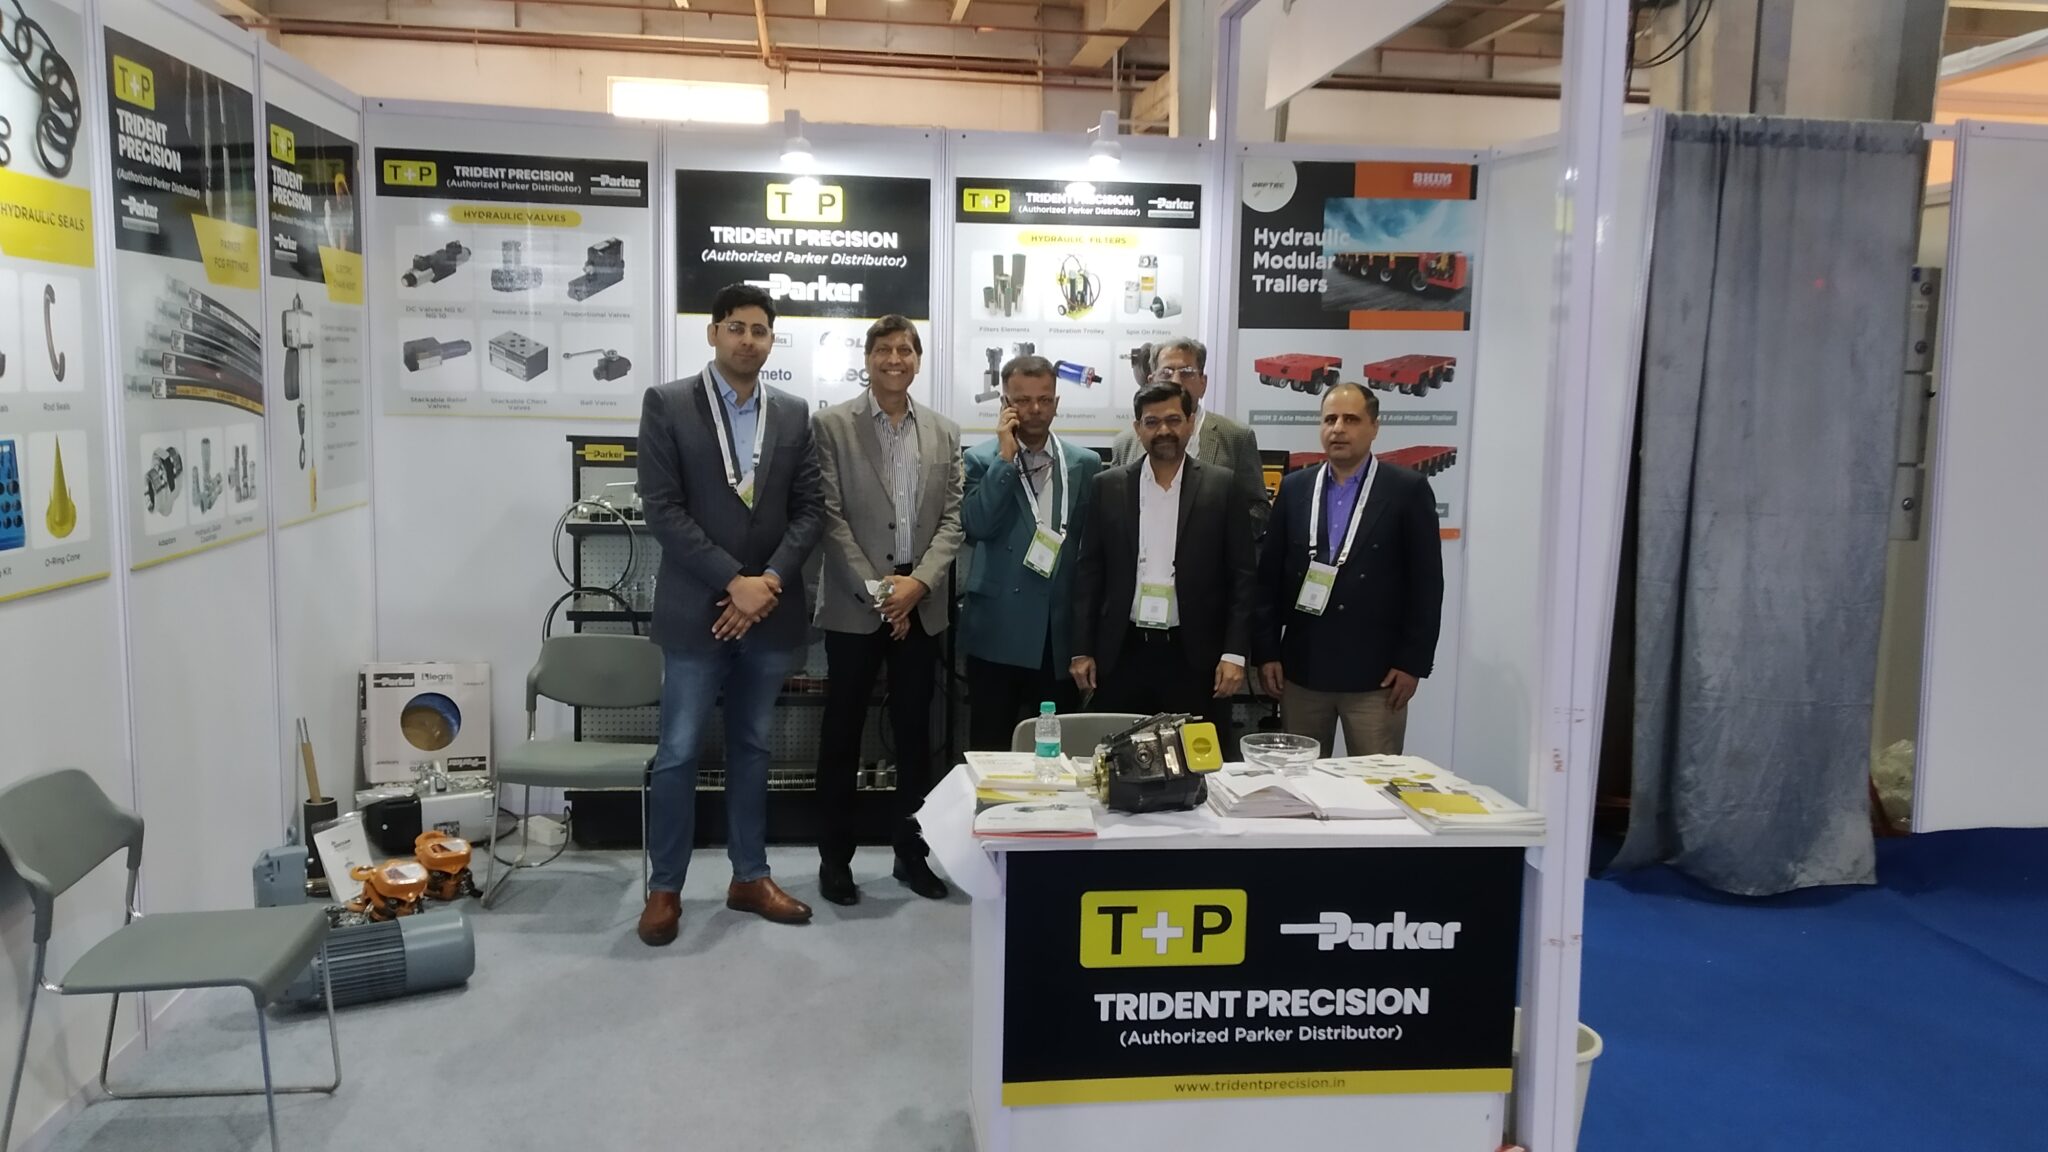 Trident Precision International Authorized parker distributor at Baume Conexpo Stall